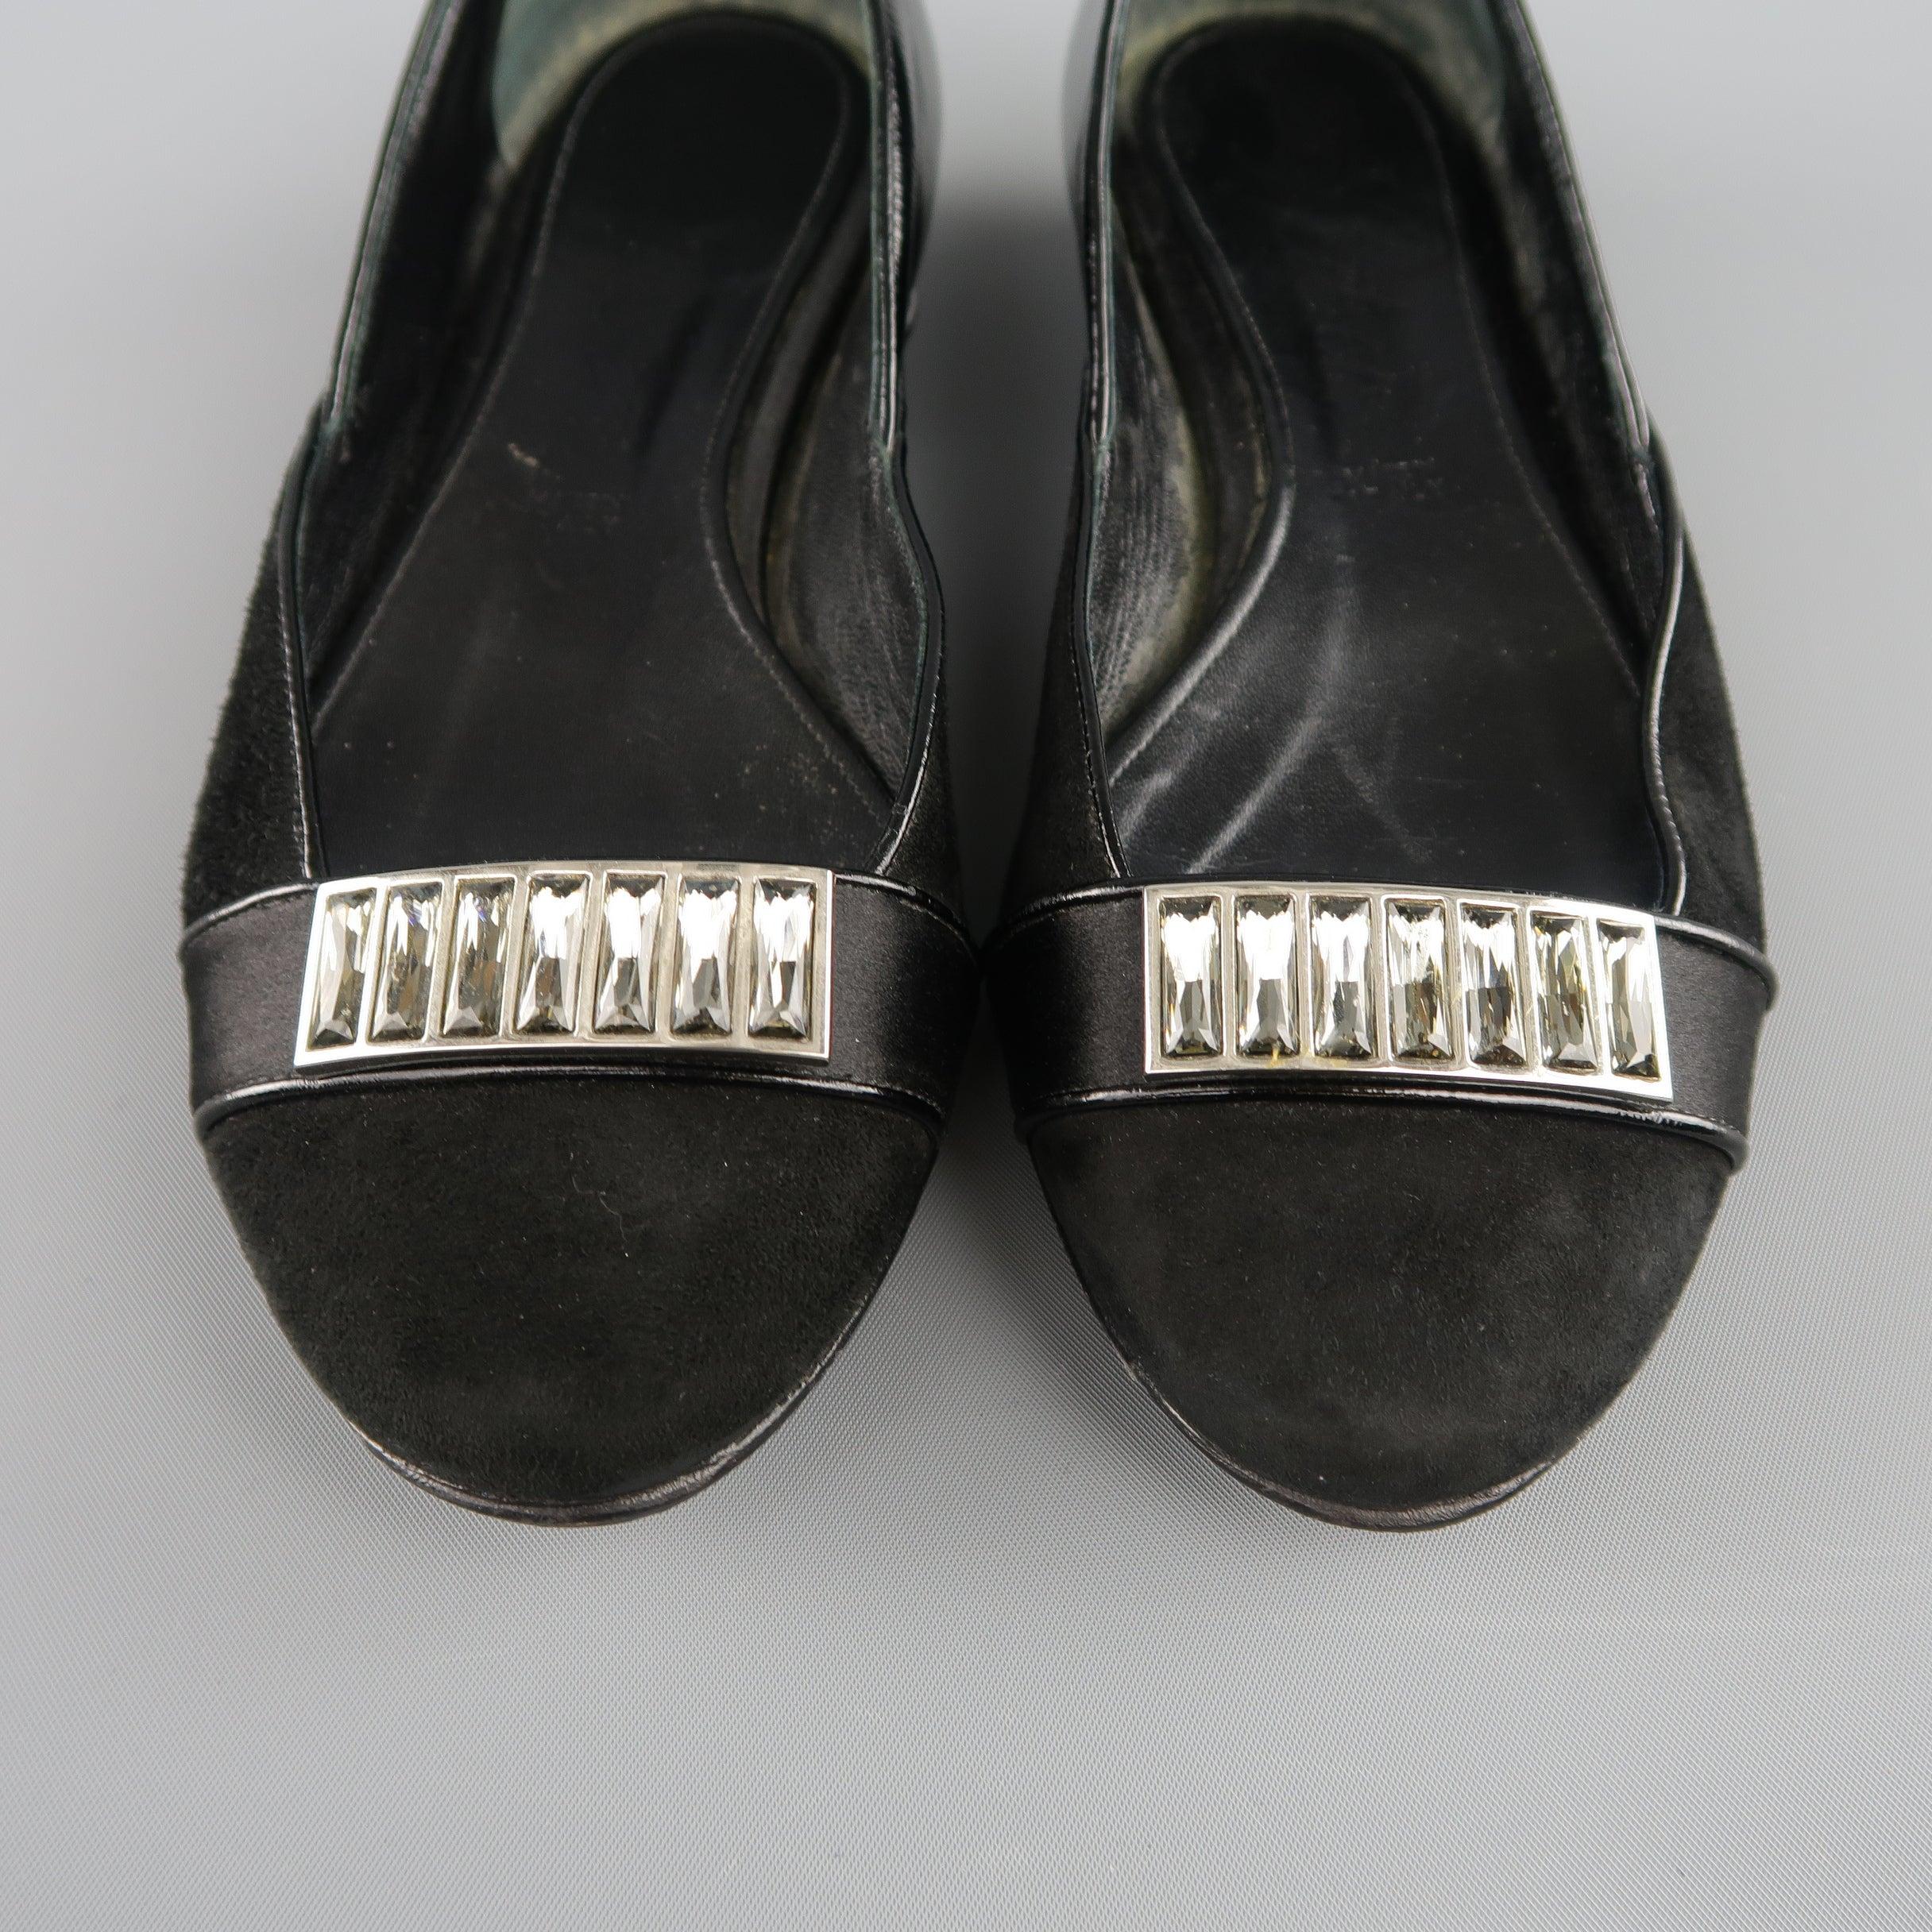 Women's JUDITH LEIBER Size 5 Black Suede & Patent Leather Rhinestone Flats For Sale